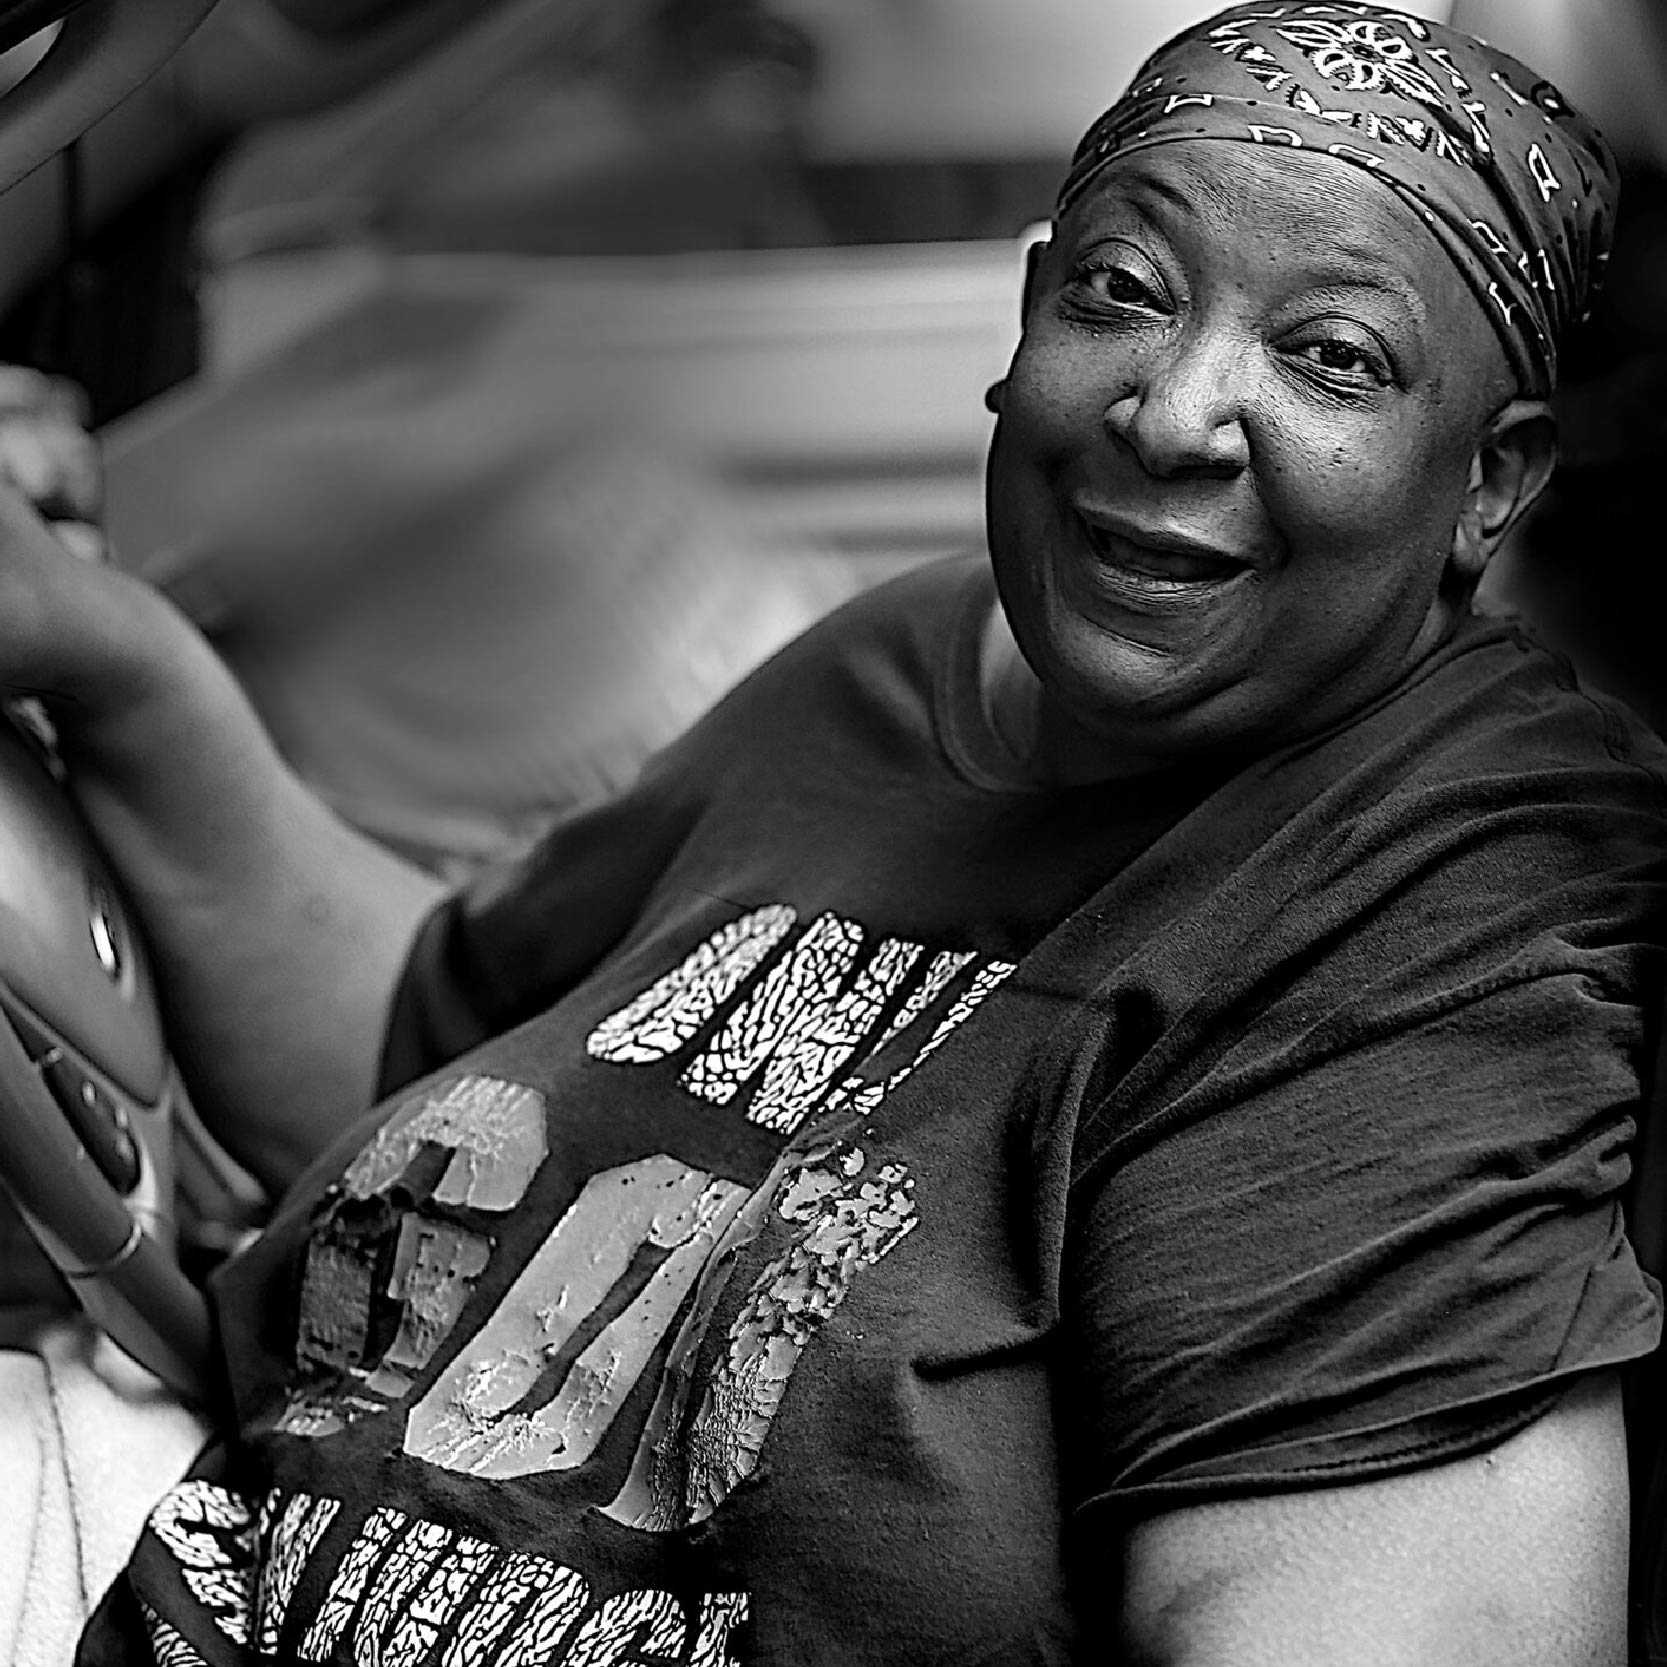 An elderly African-America woman smiling from her car